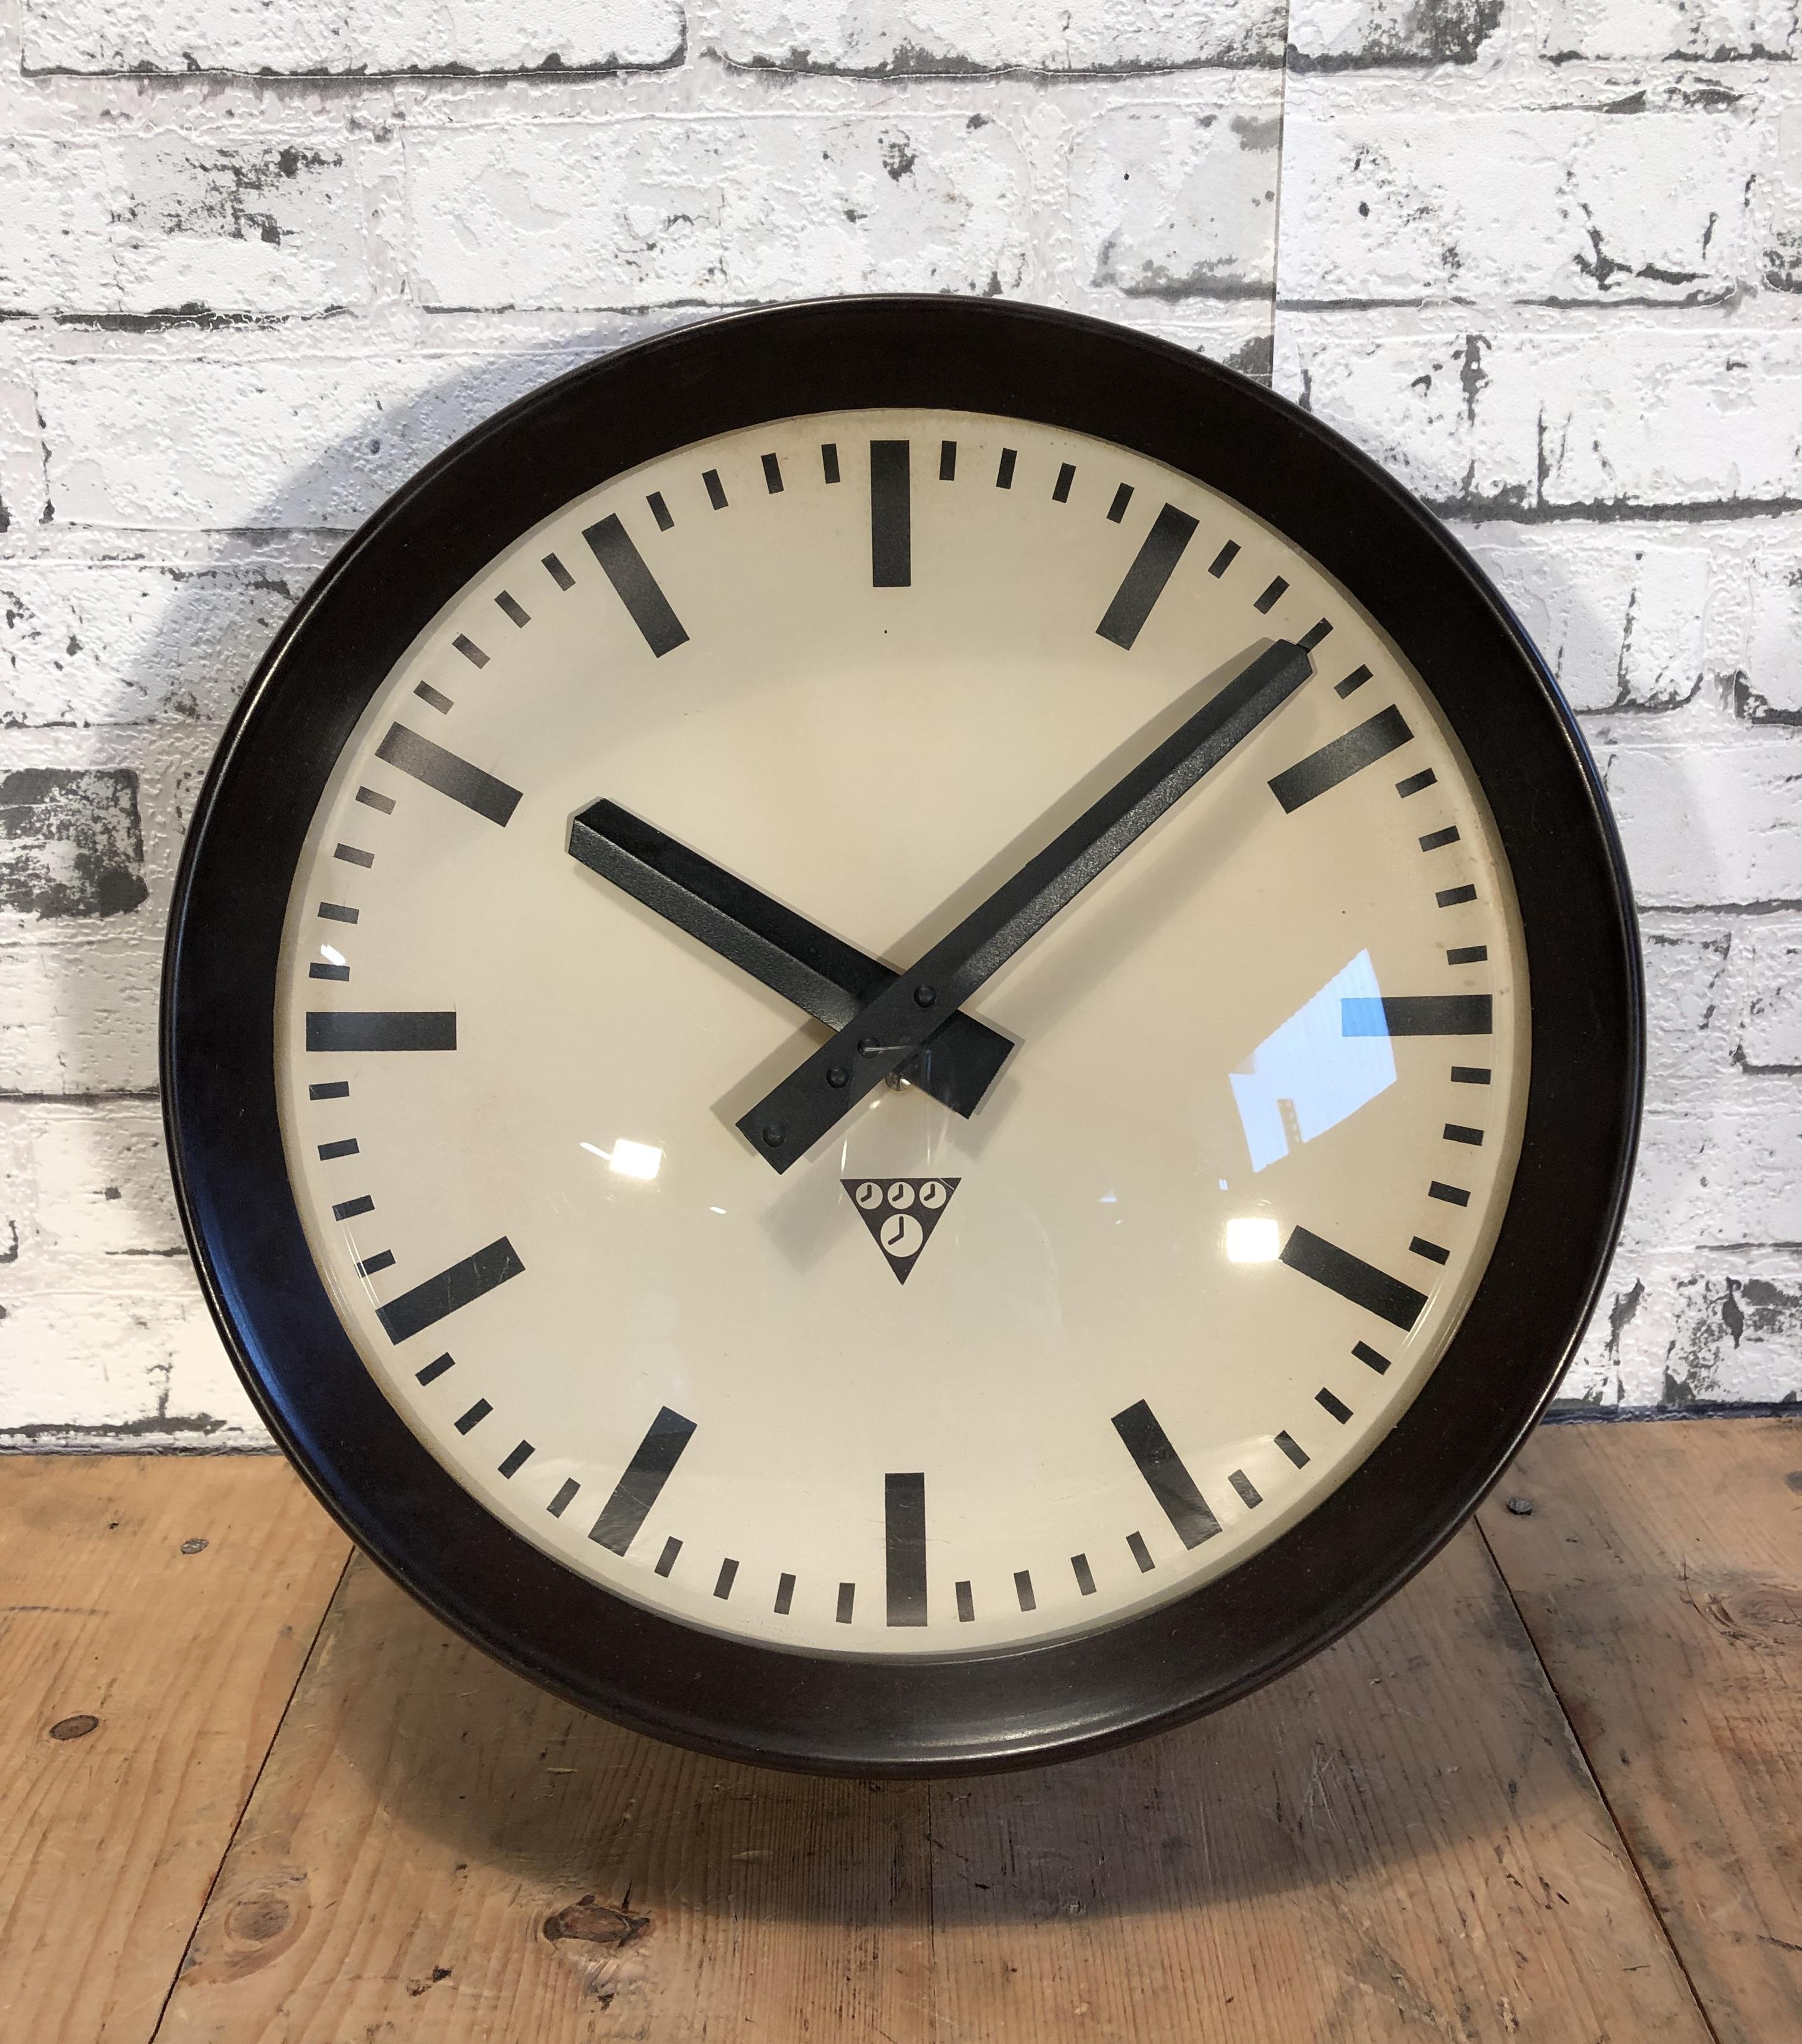 This wall clock was produced by Pragotron in former Czechoslovakia during the 1960s. The piece features a brown Bakelite frame, aluminium dial and a curved clear glass cover. The piece has been converted into a battery-powered clockwork and requires